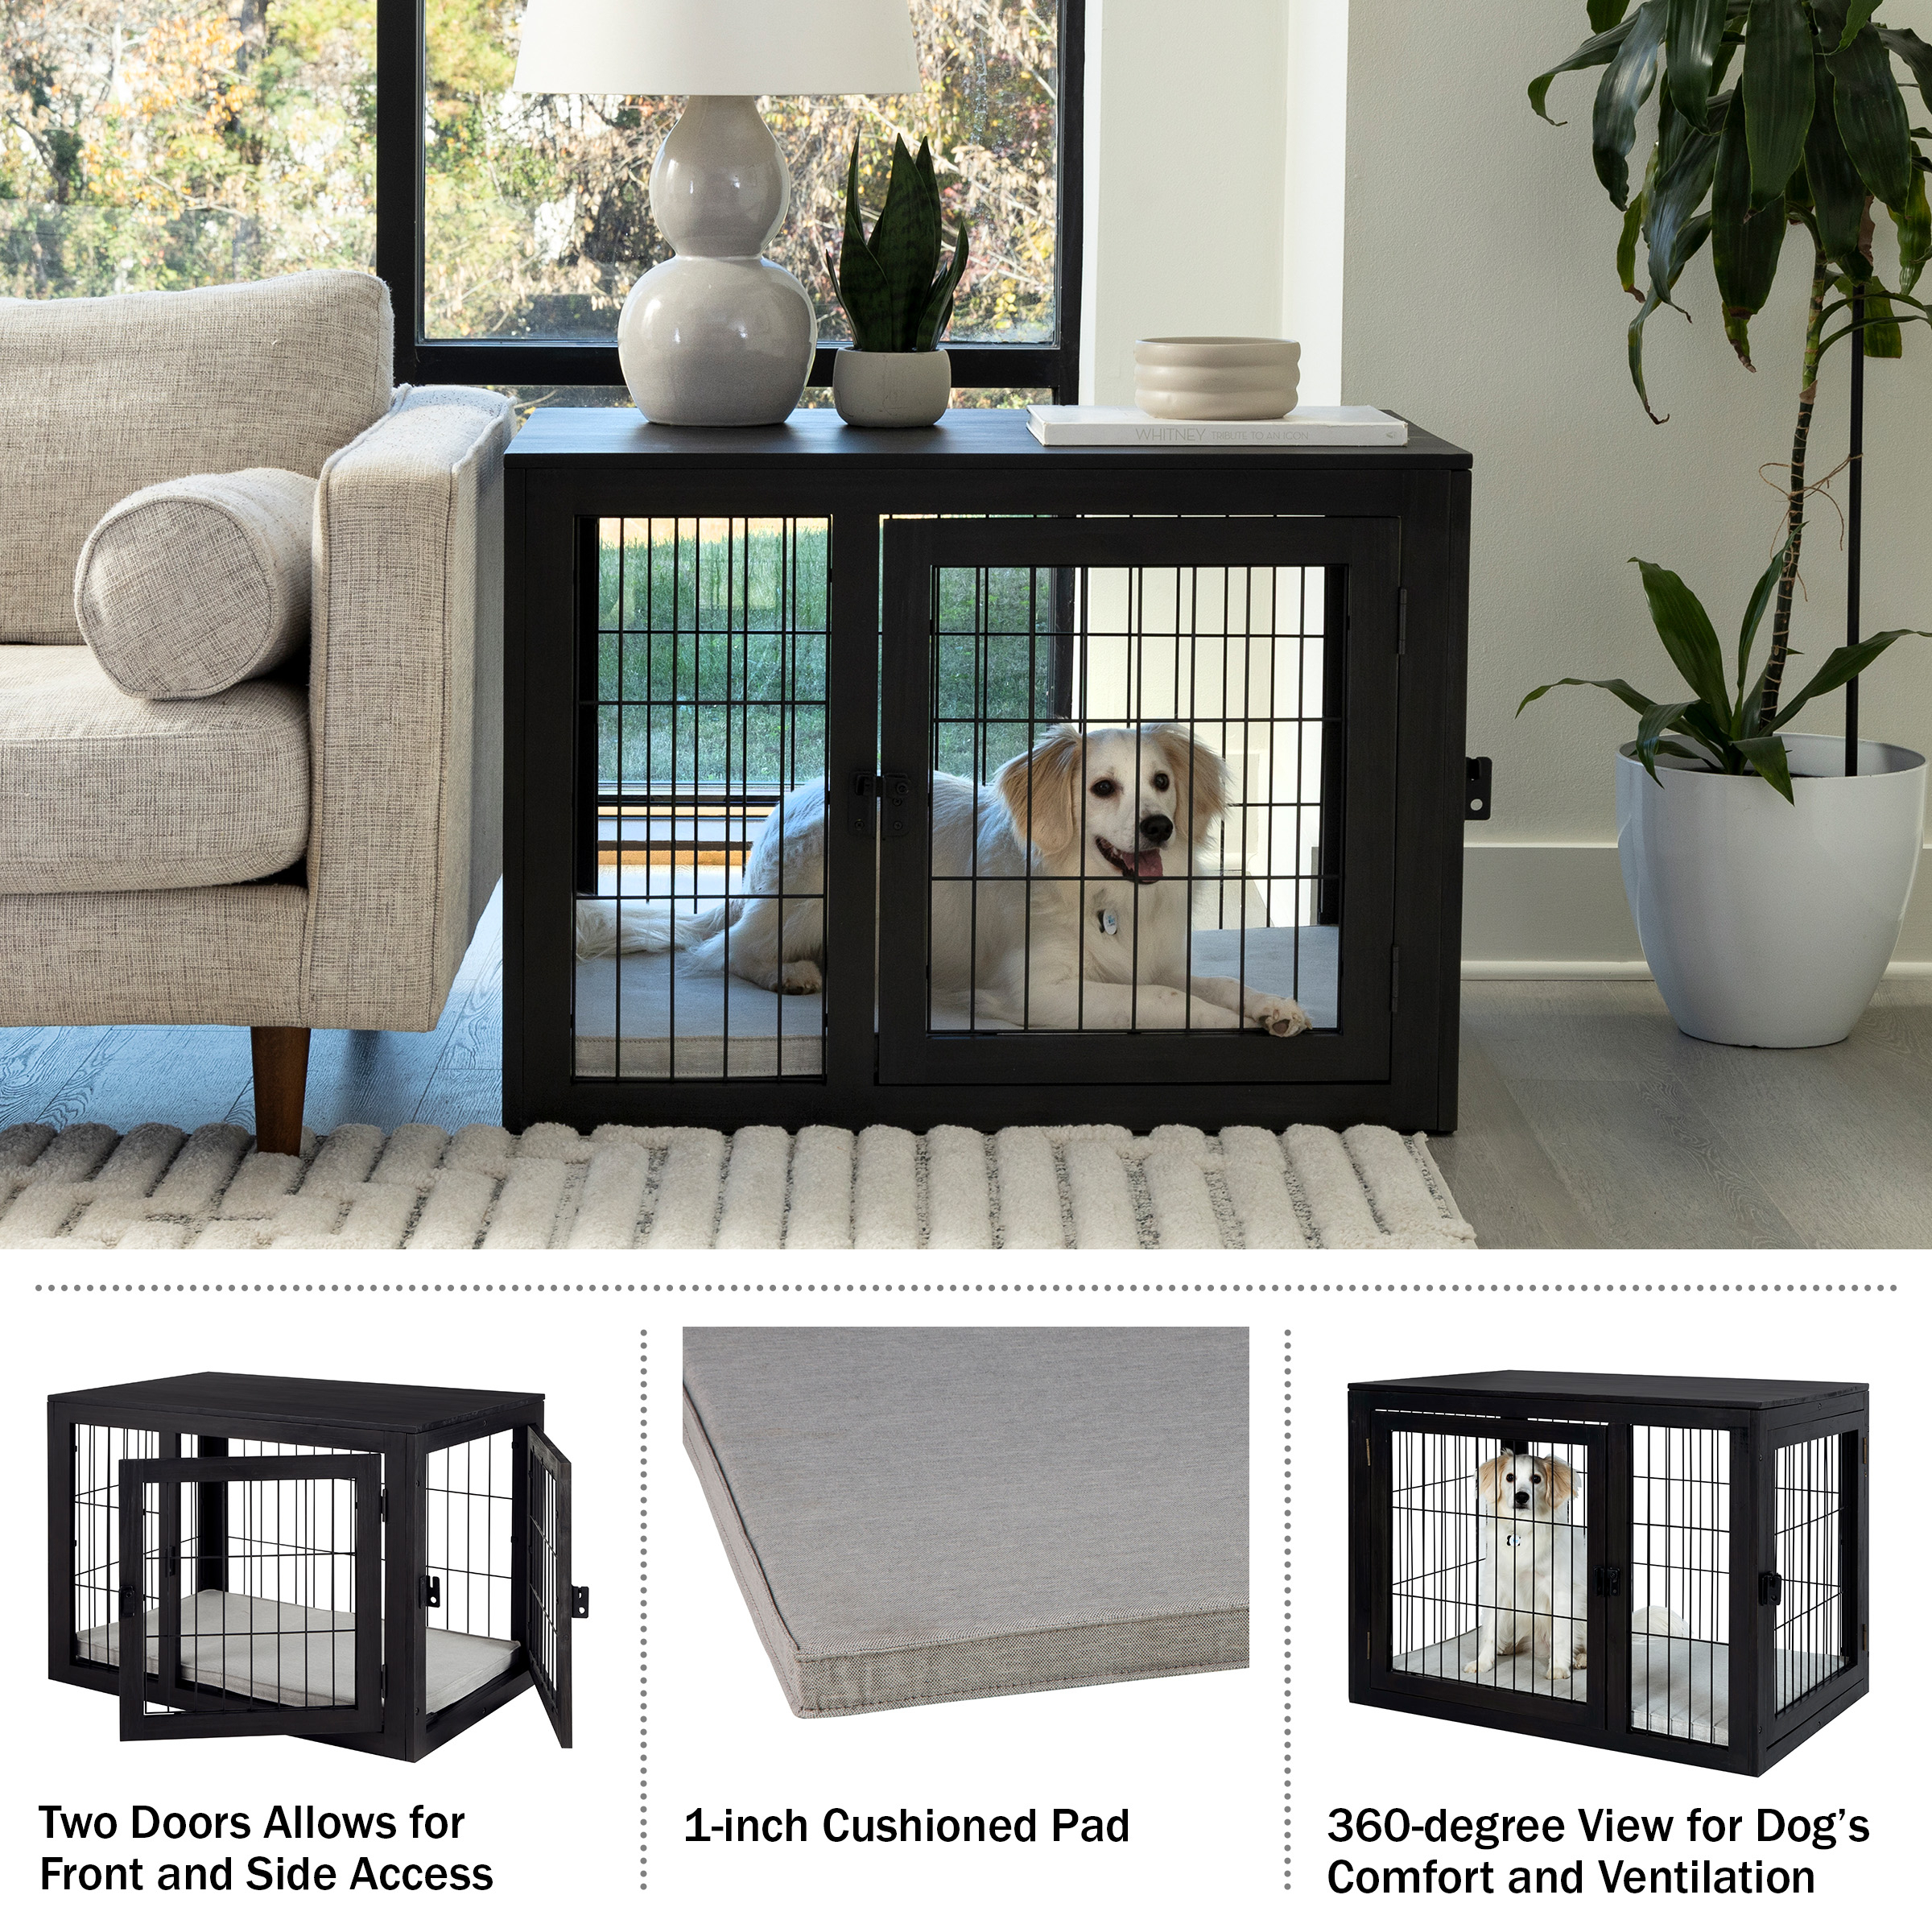 Furniture-Style Dog Crate - Acacia Wood Kennel For Medium Dogs With Double Doors And Cushion - Dog Cage Furniture By PETMAKER (Black)